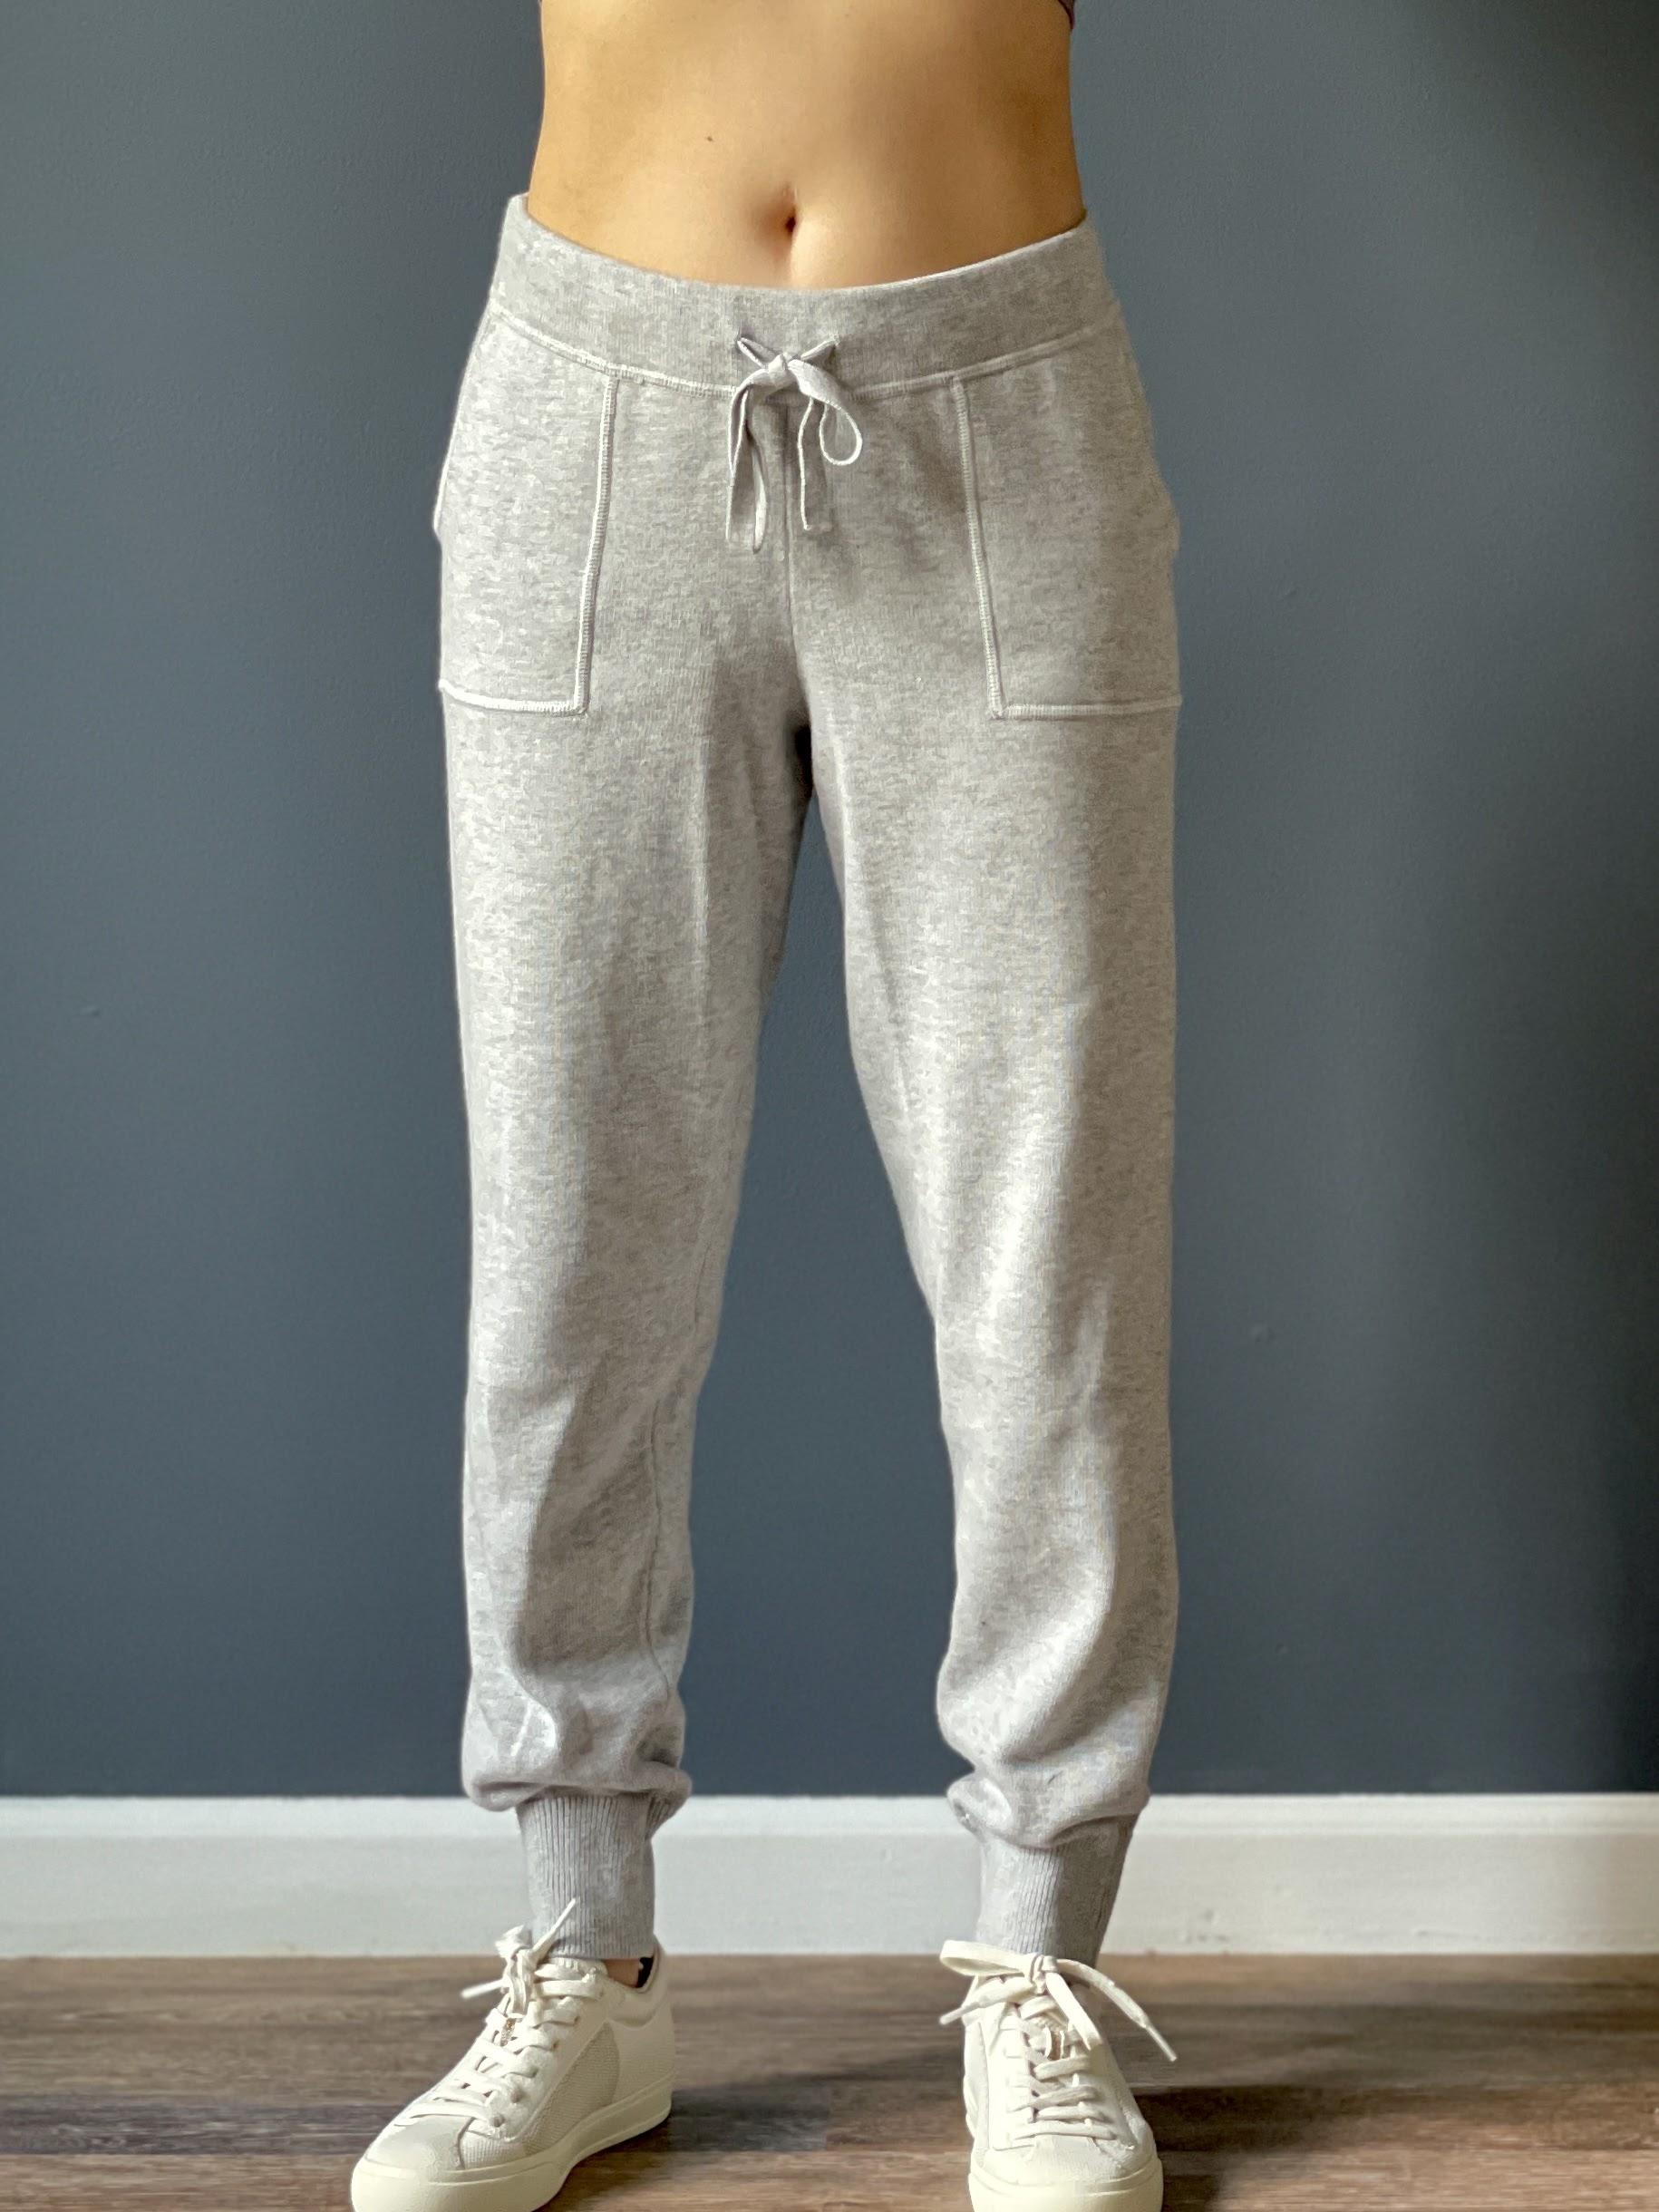 Fit Review! J.Crew Jogger Pant, Pullover Sweatshirt in Cotton Cashmere